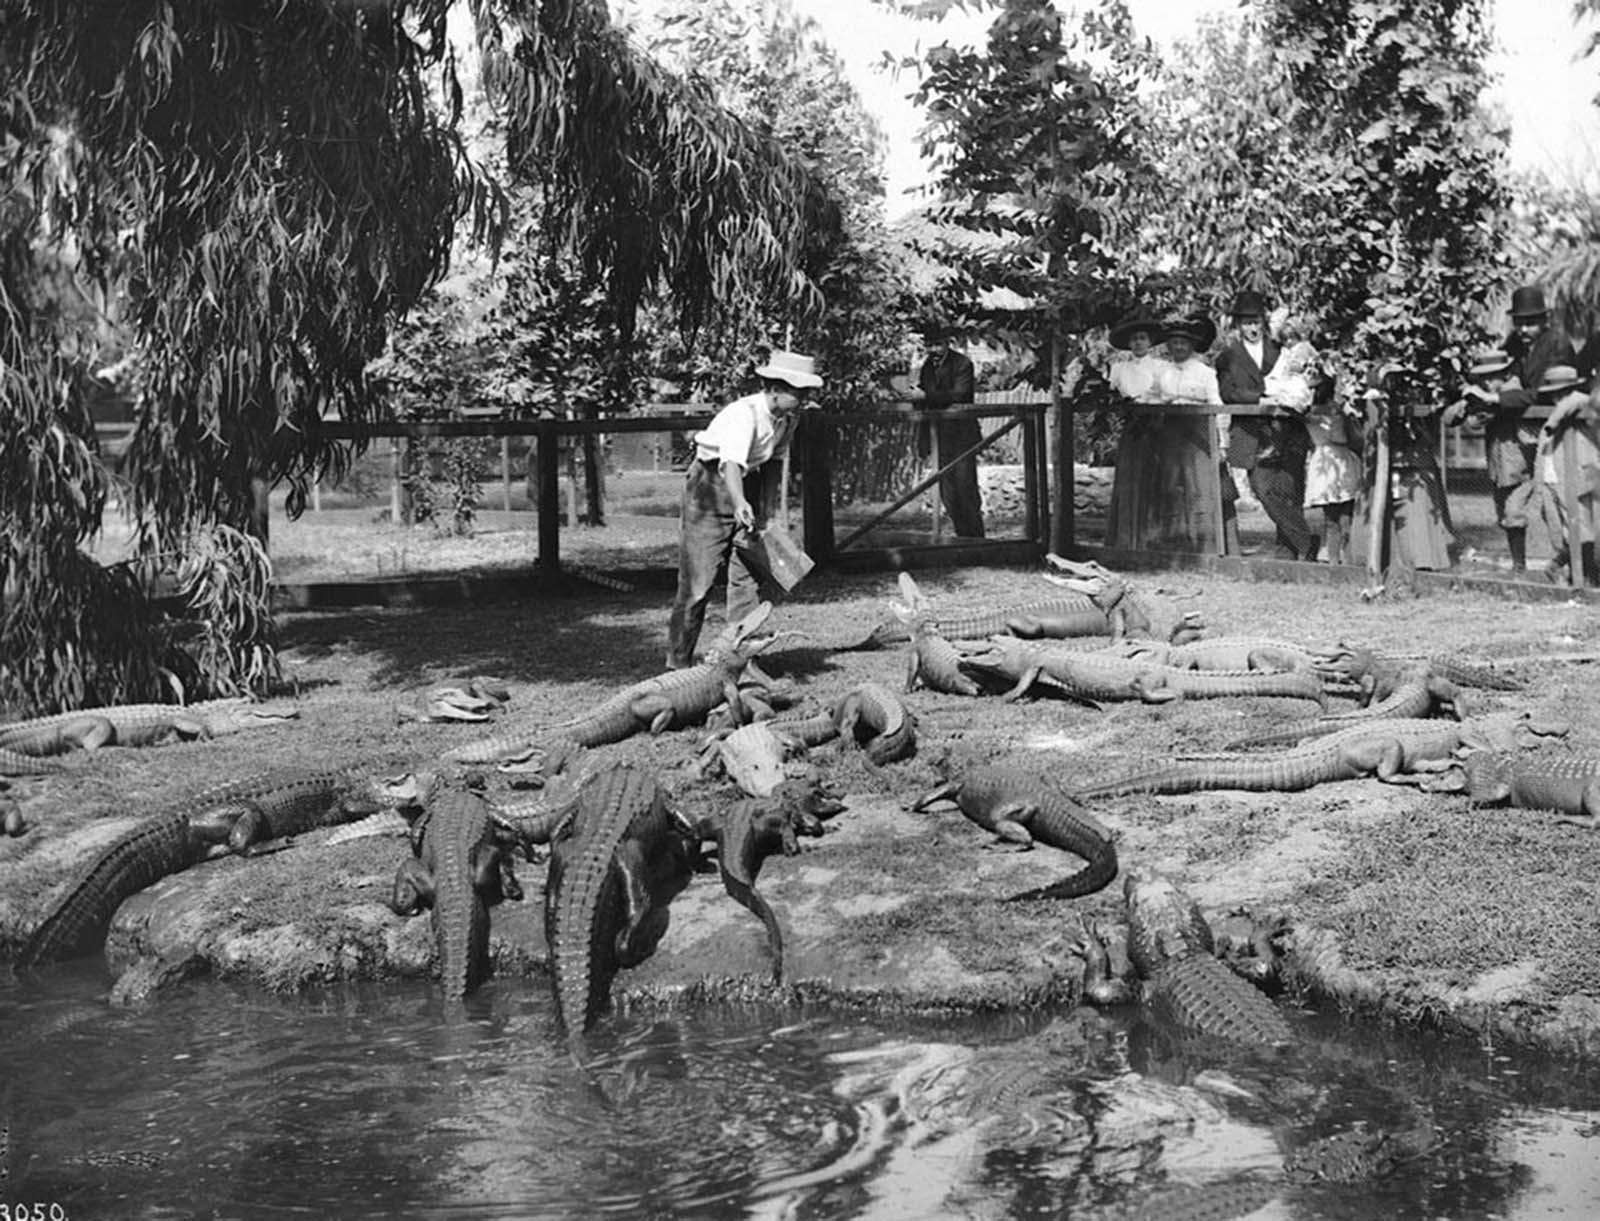 Visitors look on as a trainer tends the alligators.